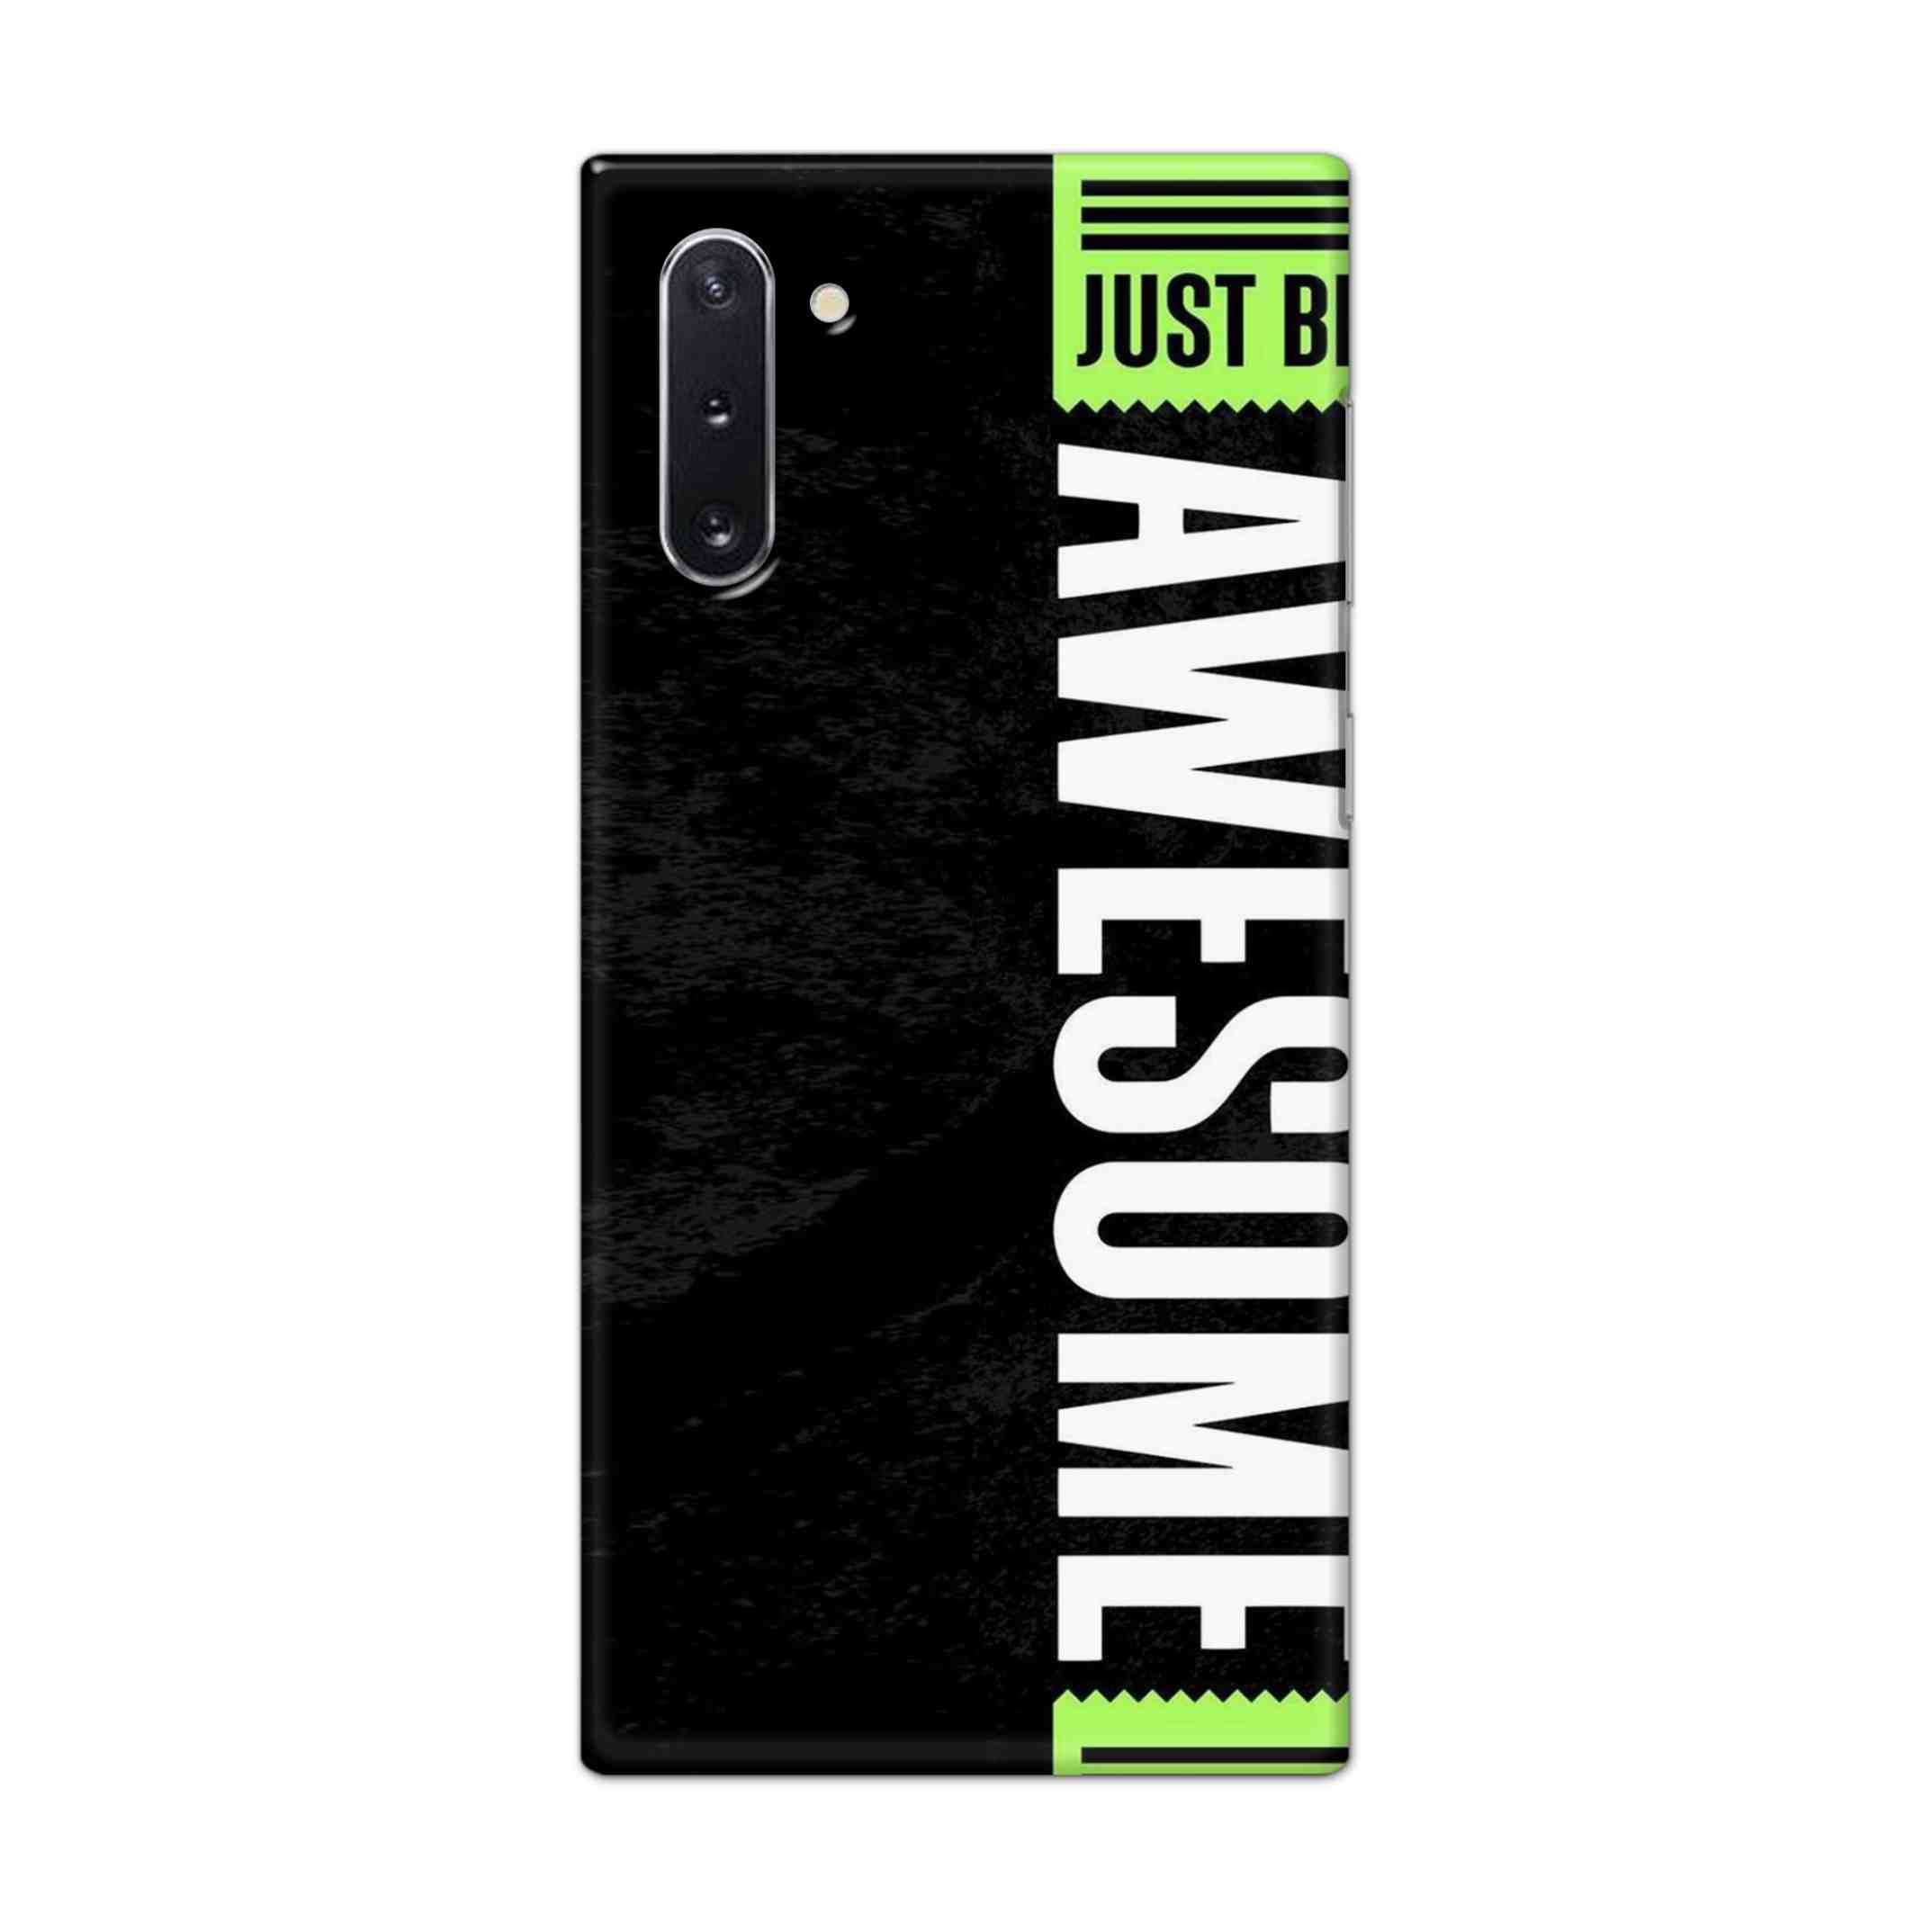 Buy Awesome Street Hard Back Mobile Phone Case Cover For Samsung Galaxy Note 10 Online